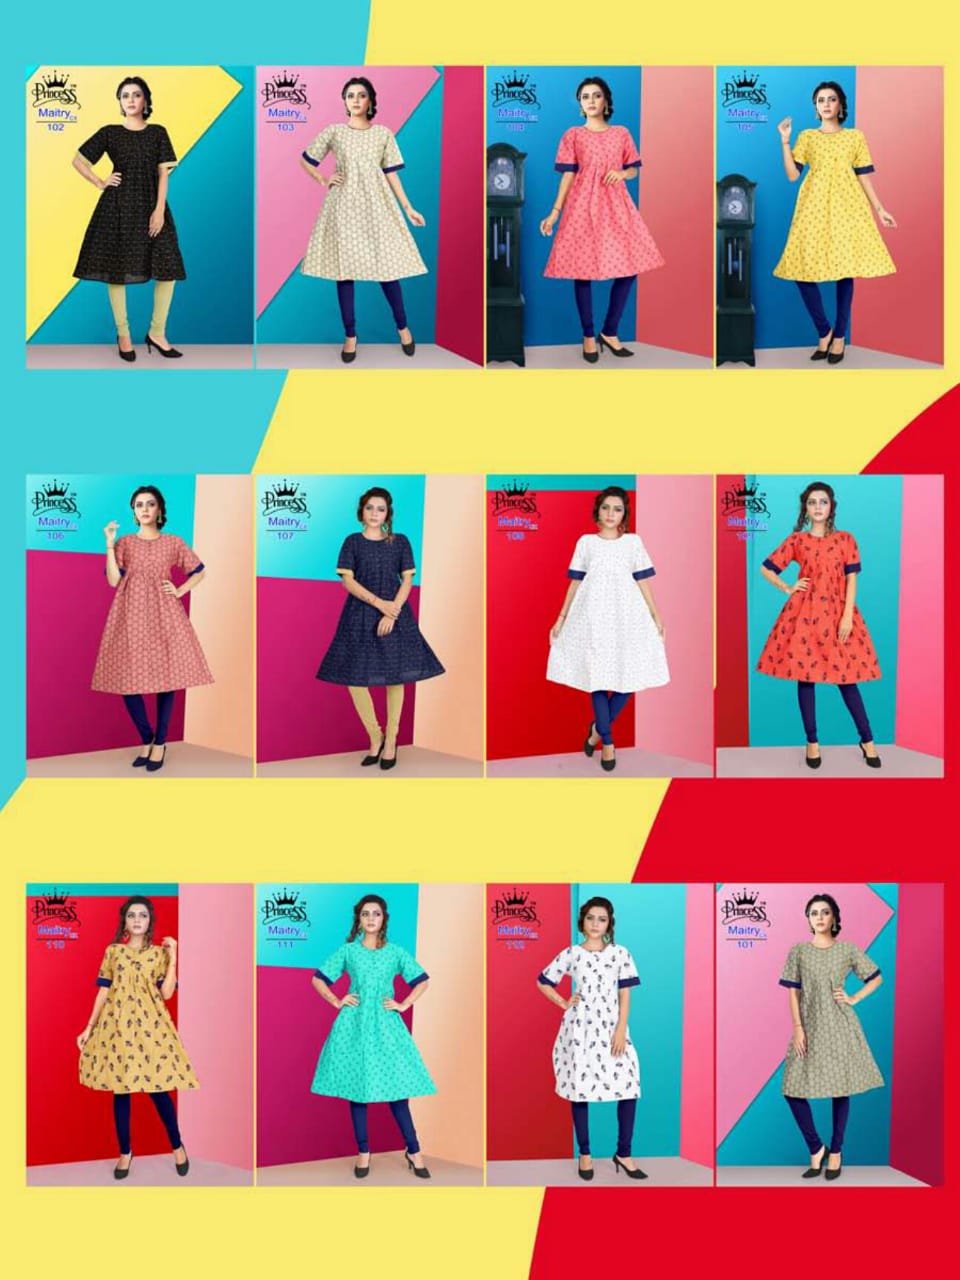 Maitry Cx By Princess 101 To 112 Series Beautiful Colorful Stylish Fancy Casual Wear & Ethnic Wear & Ready To Wear Cotton Denim Kurtis At Wholesale Price